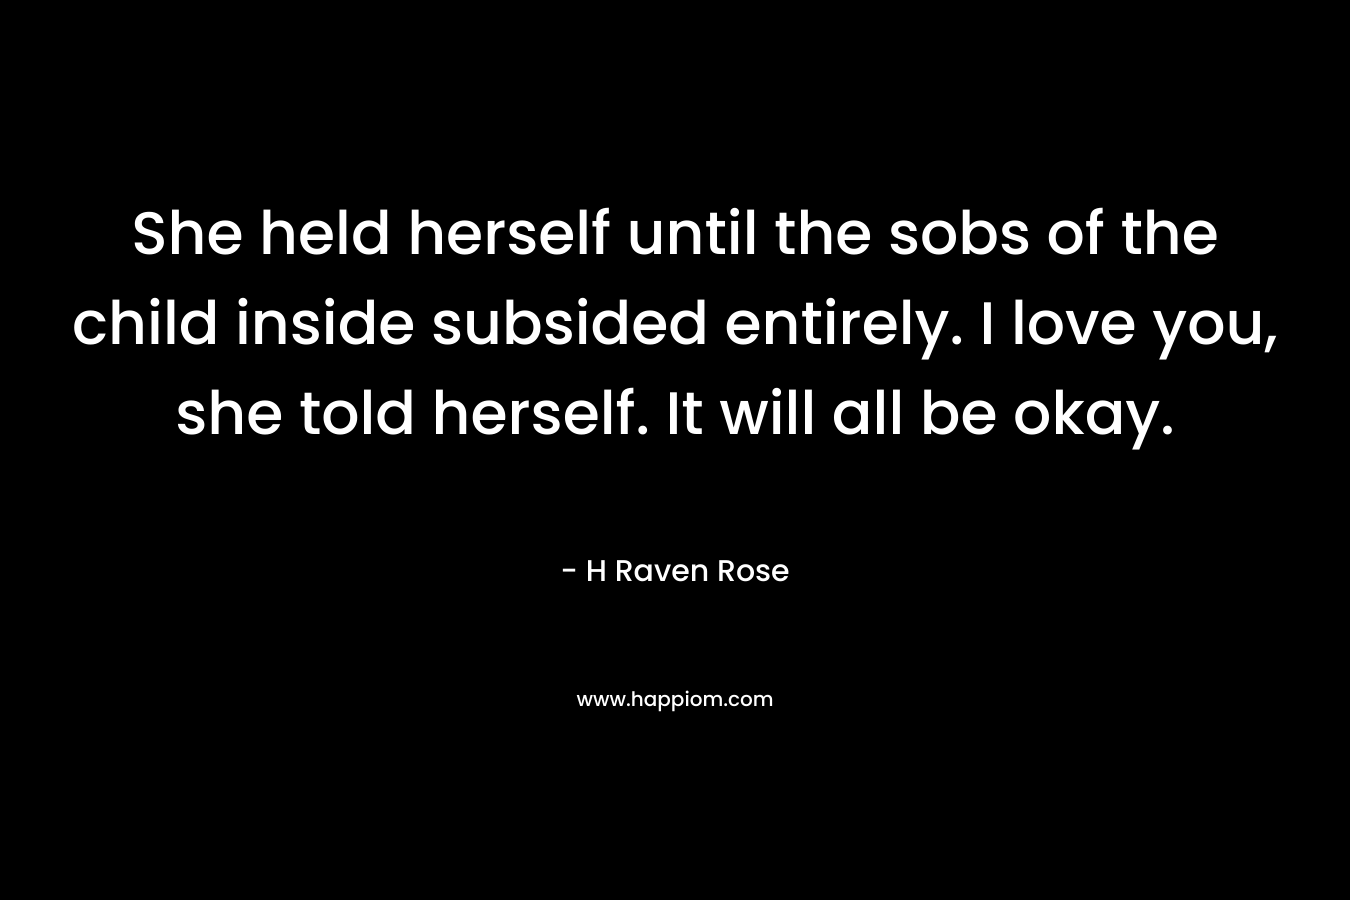 She held herself until the sobs of the child inside subsided entirely. I love you, she told herself. It will all be okay. – H Raven Rose